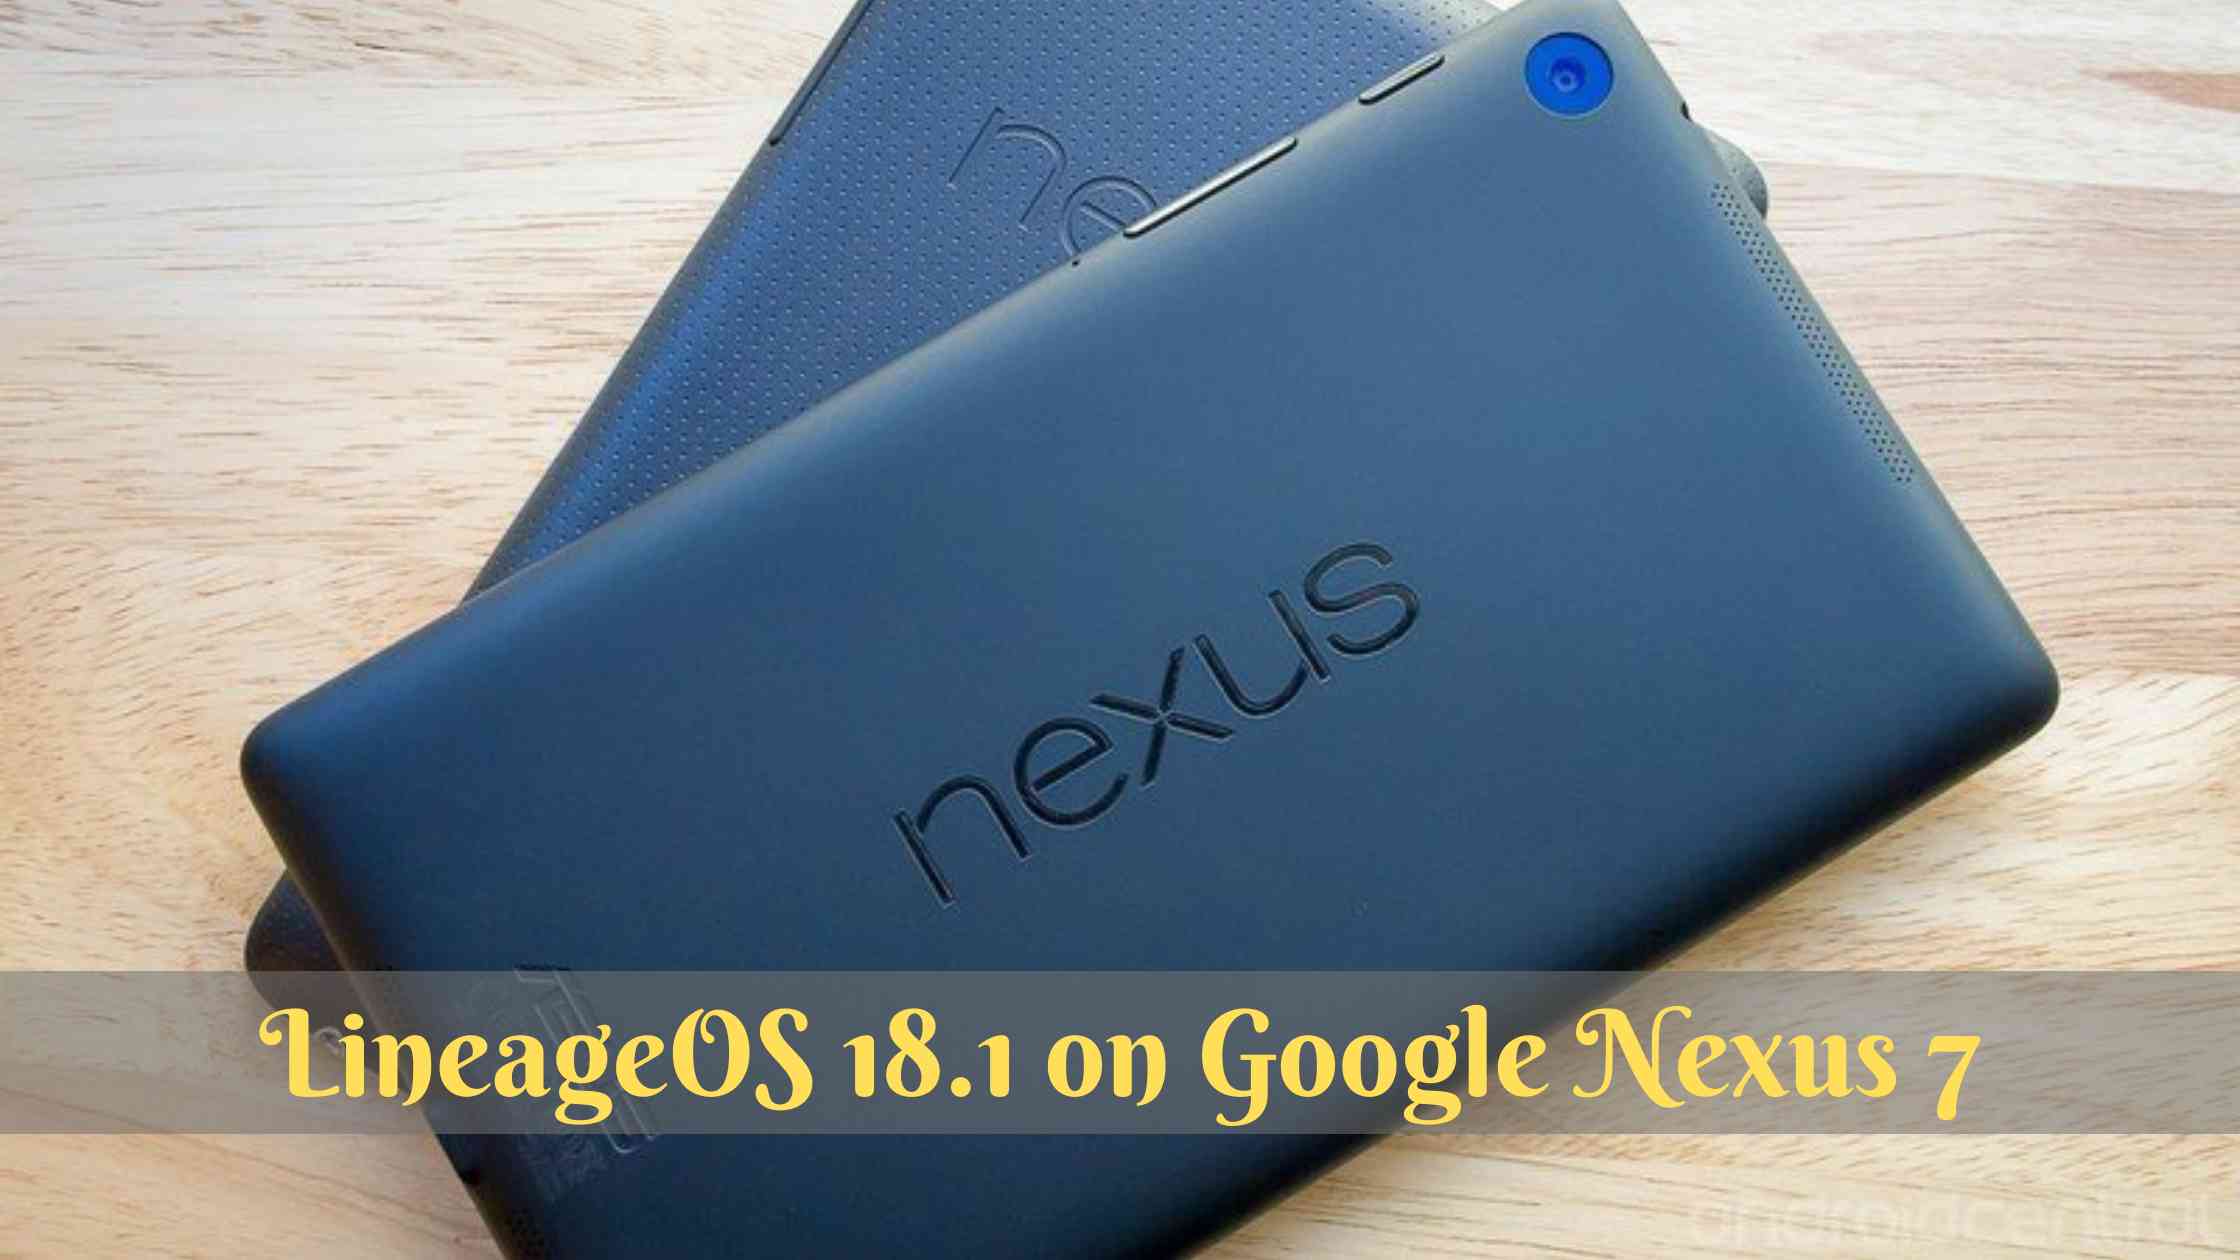 How to Download and Install LineageOS 18.1 on Google Nexus 7? (Android 11)